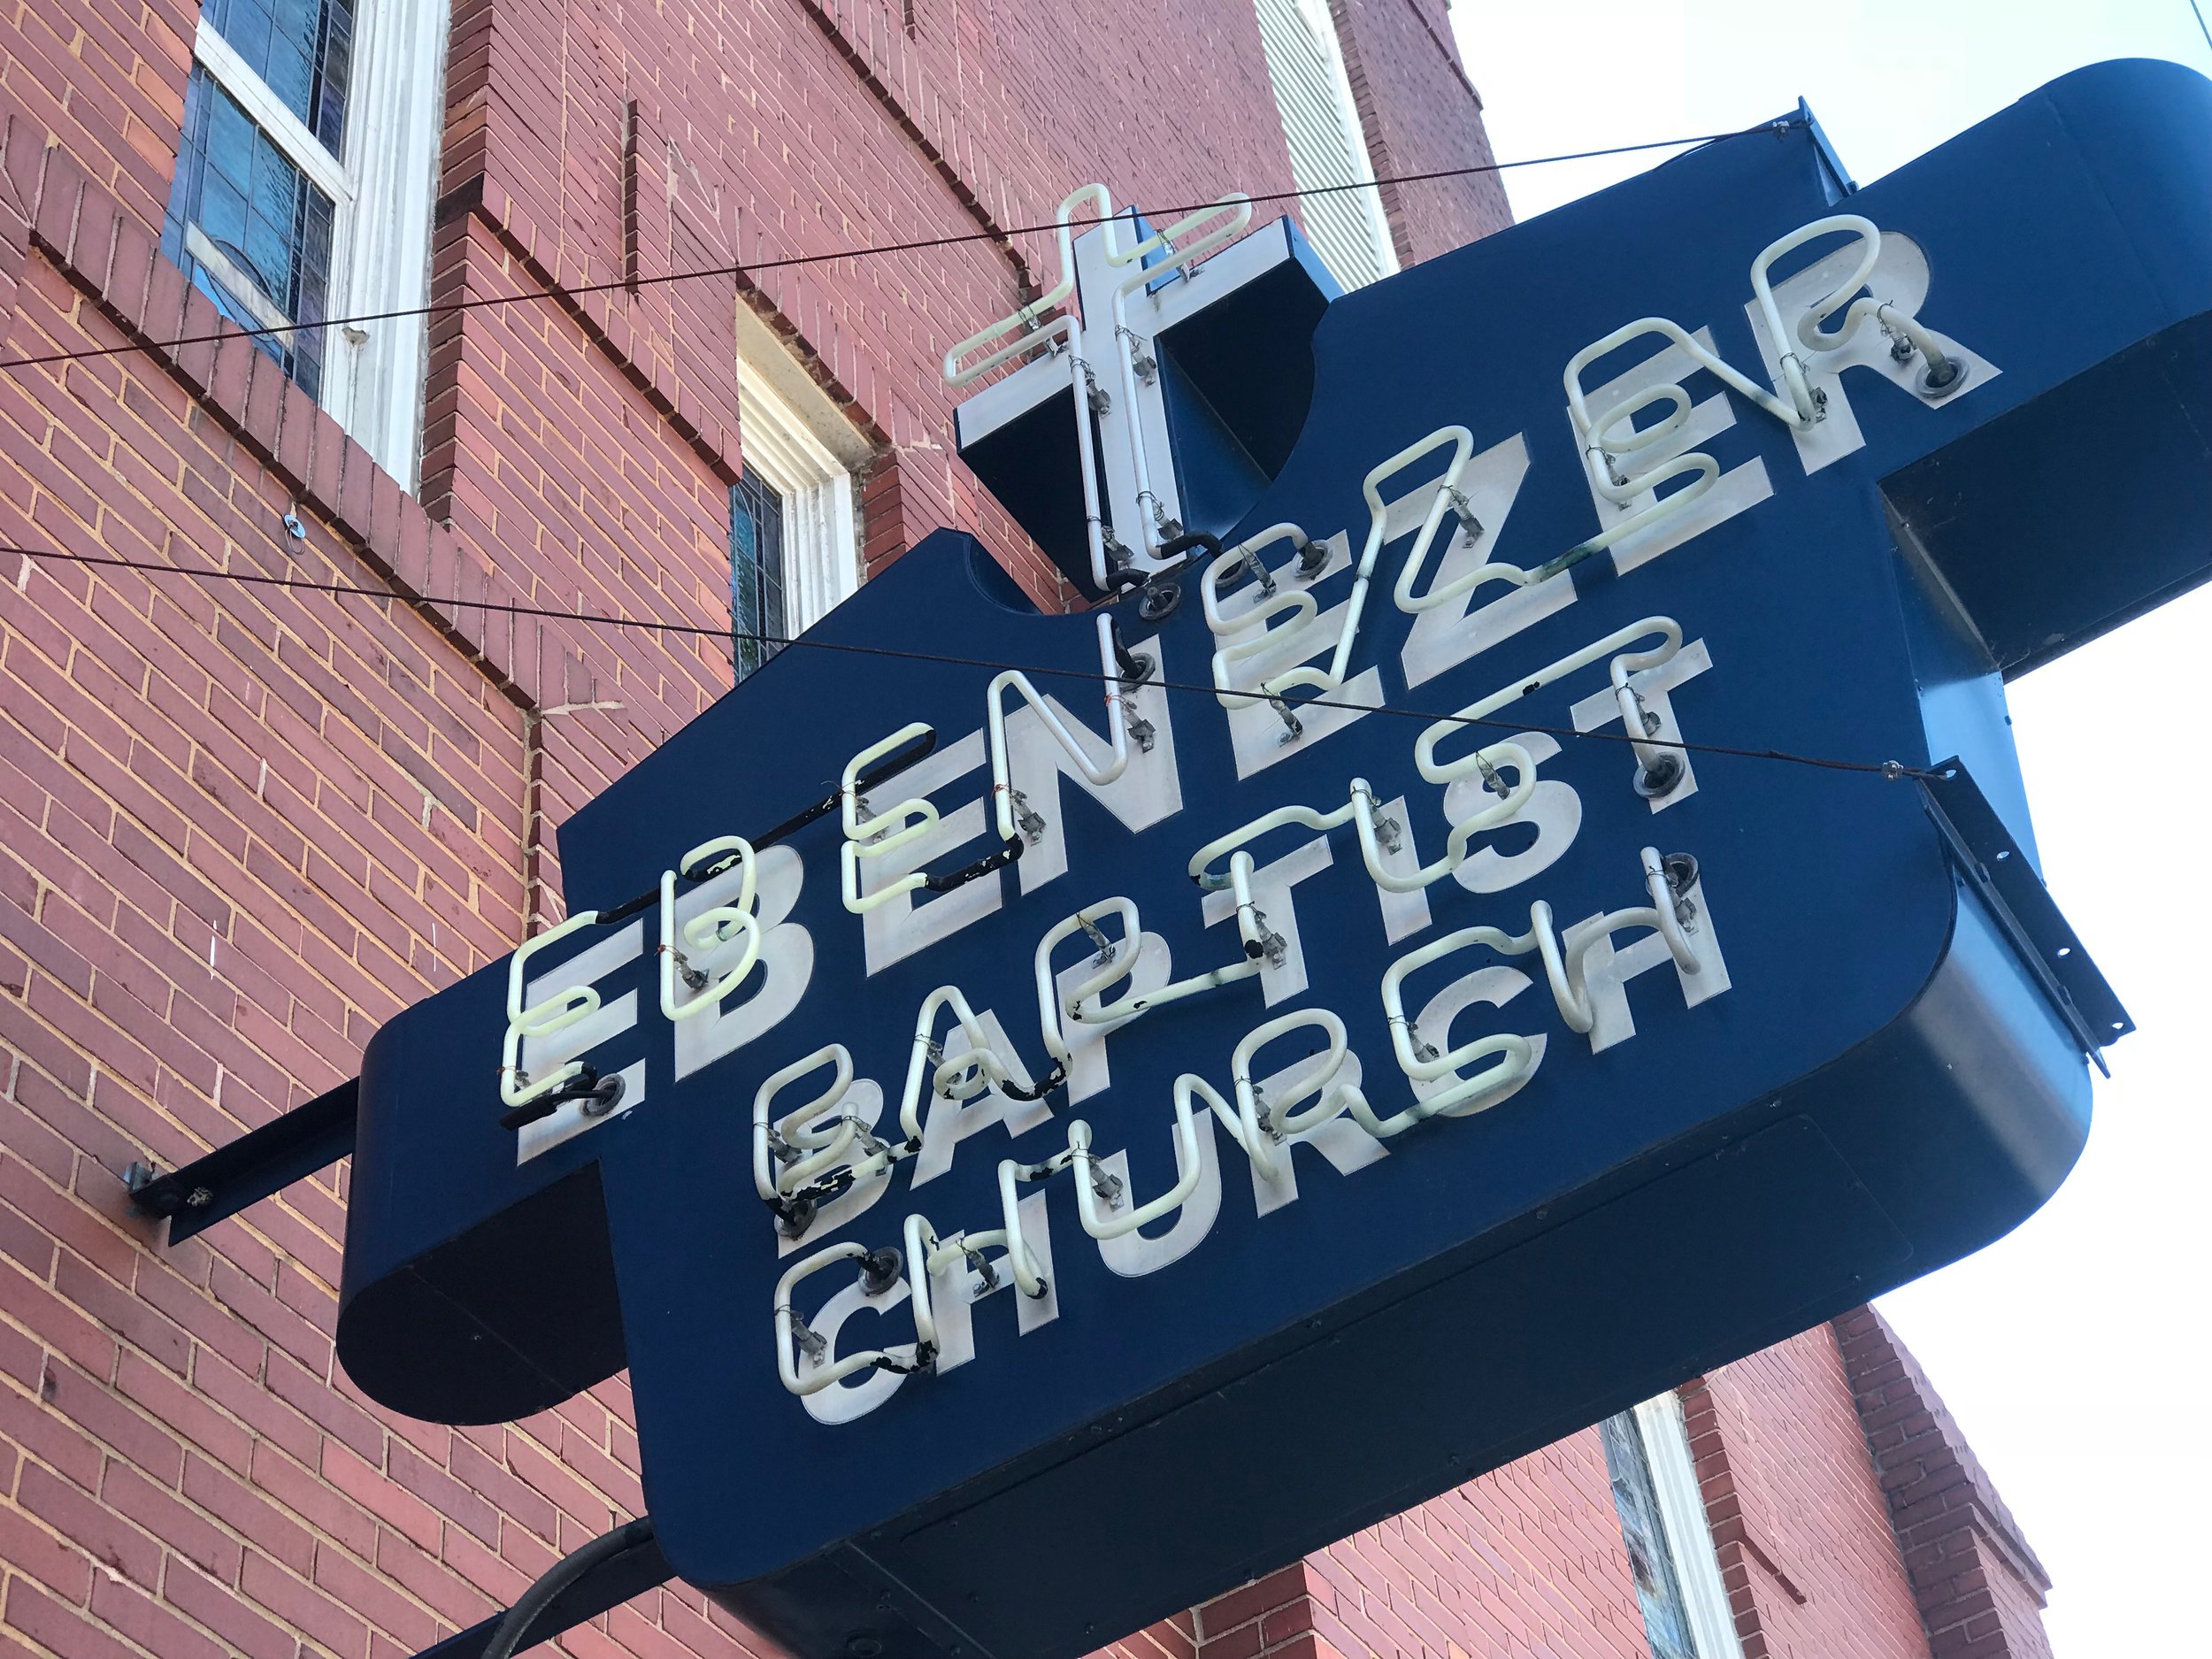  Atlanta: The voice of Dr. Martin Luther King Jr. can still be heard in the historic Ebenezer Baptist Church, which is now part of the National Park Service's MLK National Historic site. A new, larger Ebenezer Baptist Church has been built across the